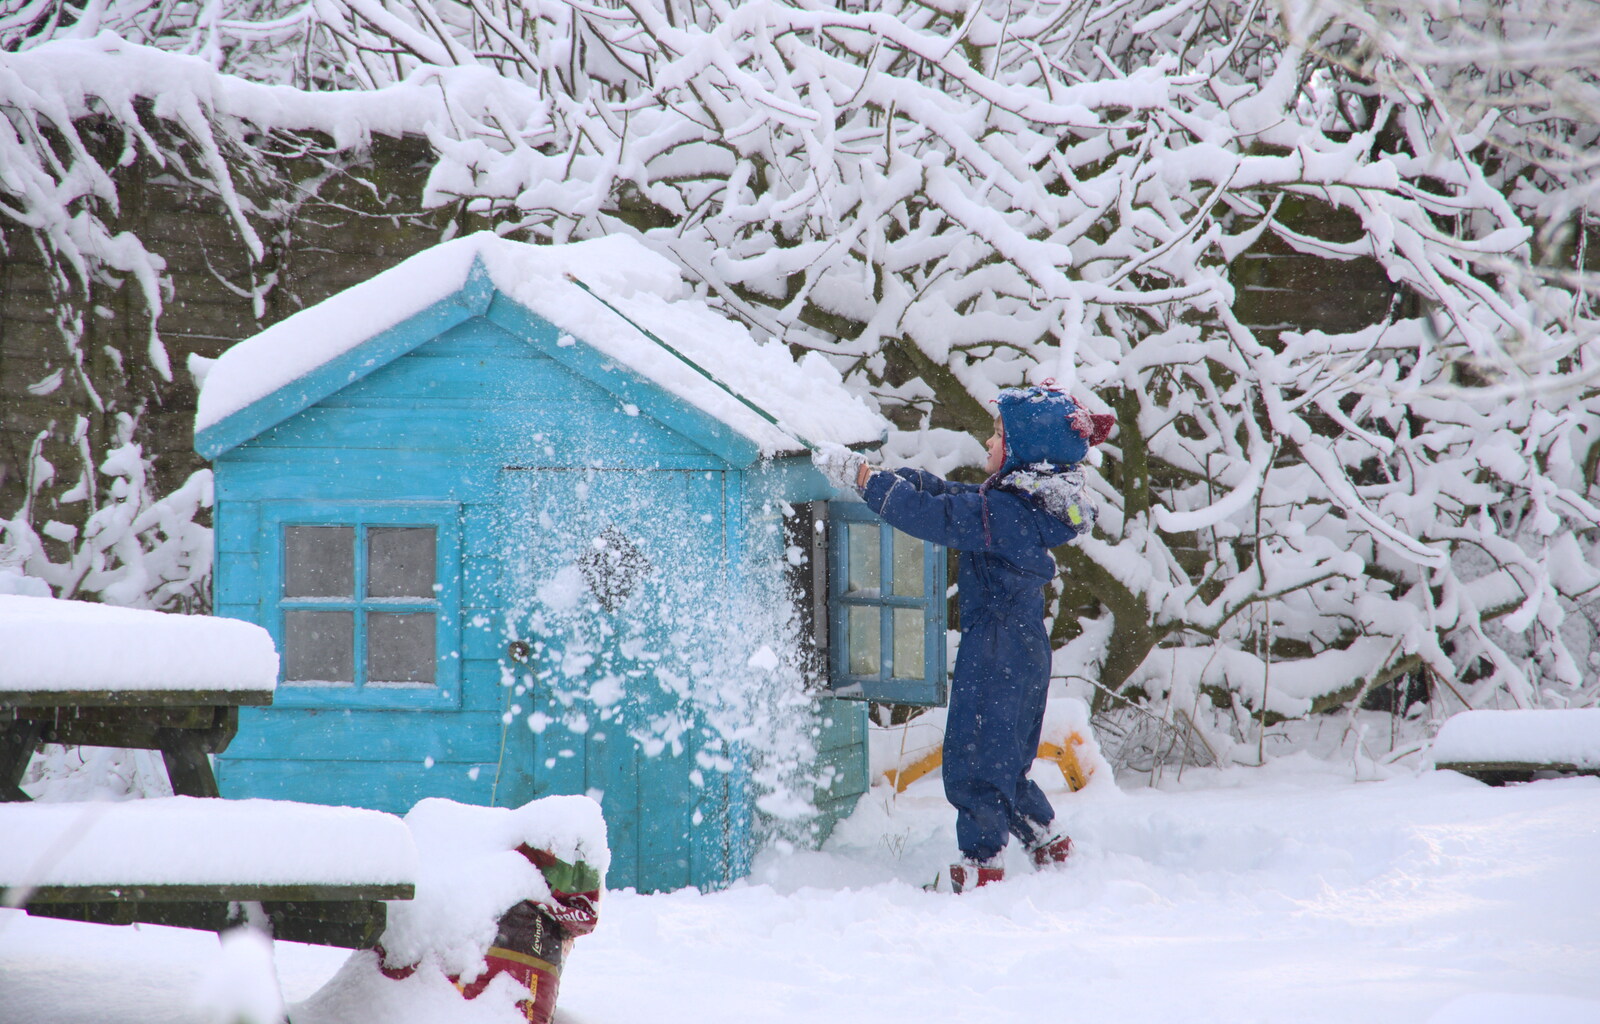 Harry clears snow off the roof from The Beast From the East: Snow Days, Brome, Suffolk - 28th February 2018